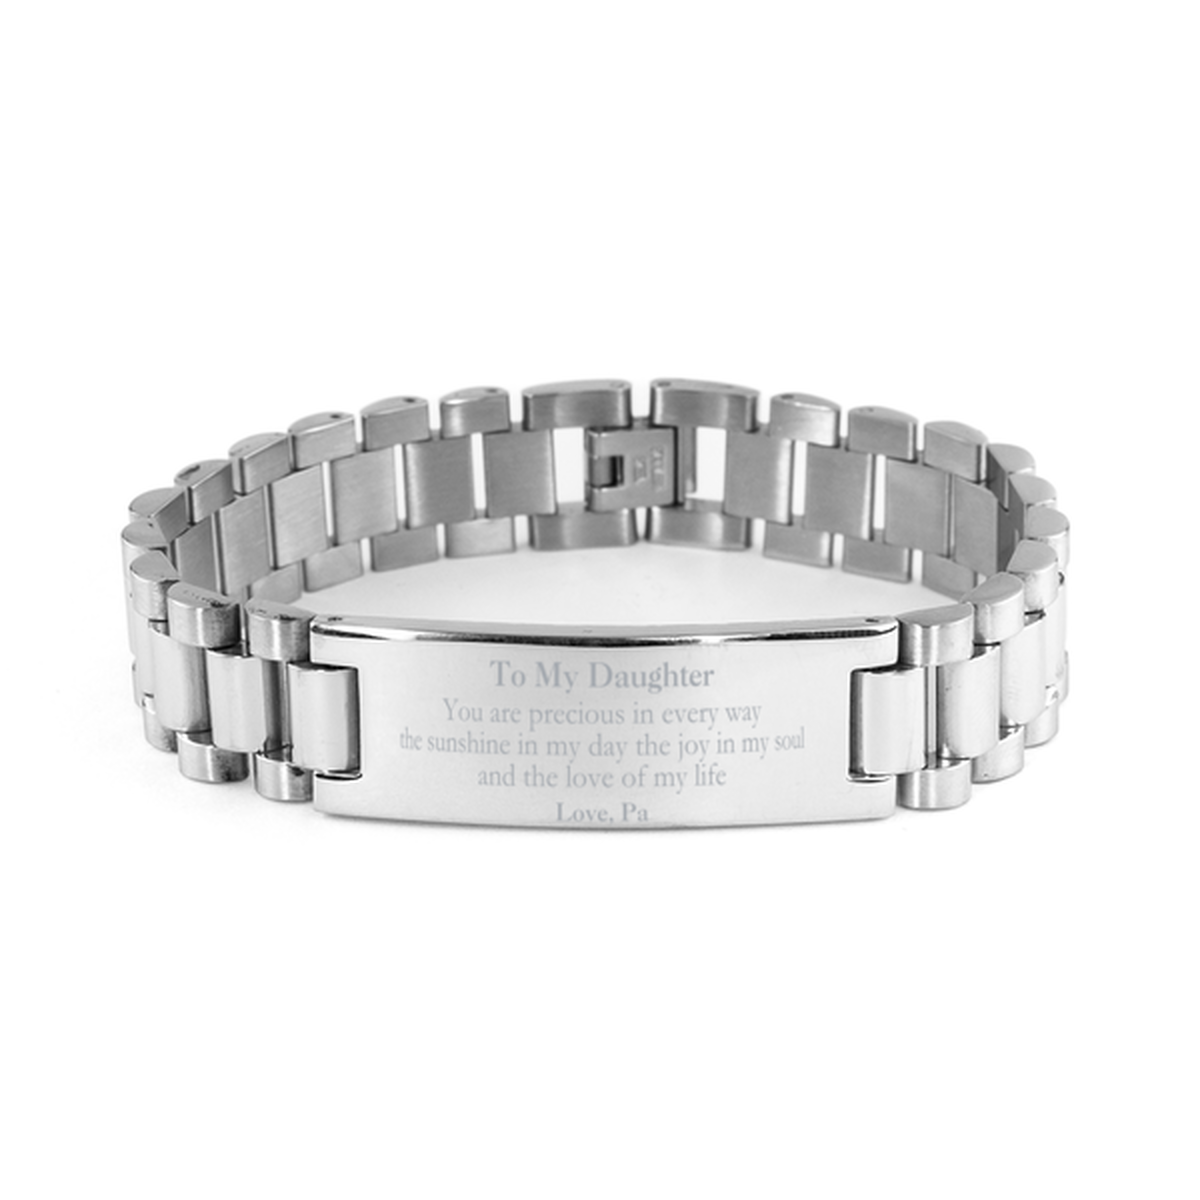 Graduation Gifts for Daughter Ladder Stainless Steel Bracelet Present from Pa, Christmas Daughter Birthday Gifts Daughter You are precious in every way the sunshine in my day. Love, Pa